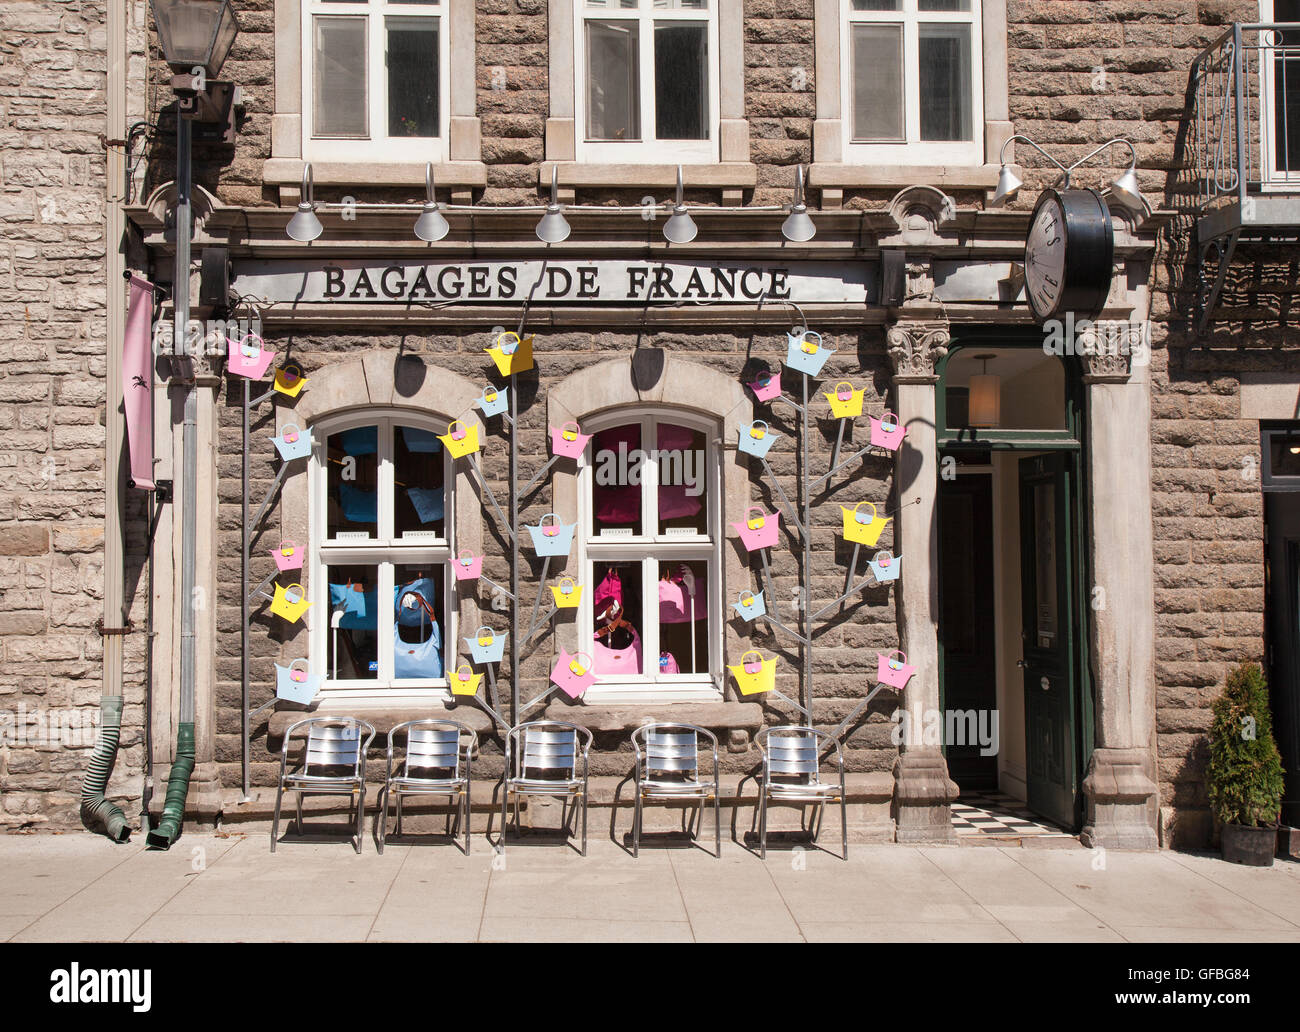 Bagages De France gift shop located in old Quebec City Canada Stock Photo -  Alamy